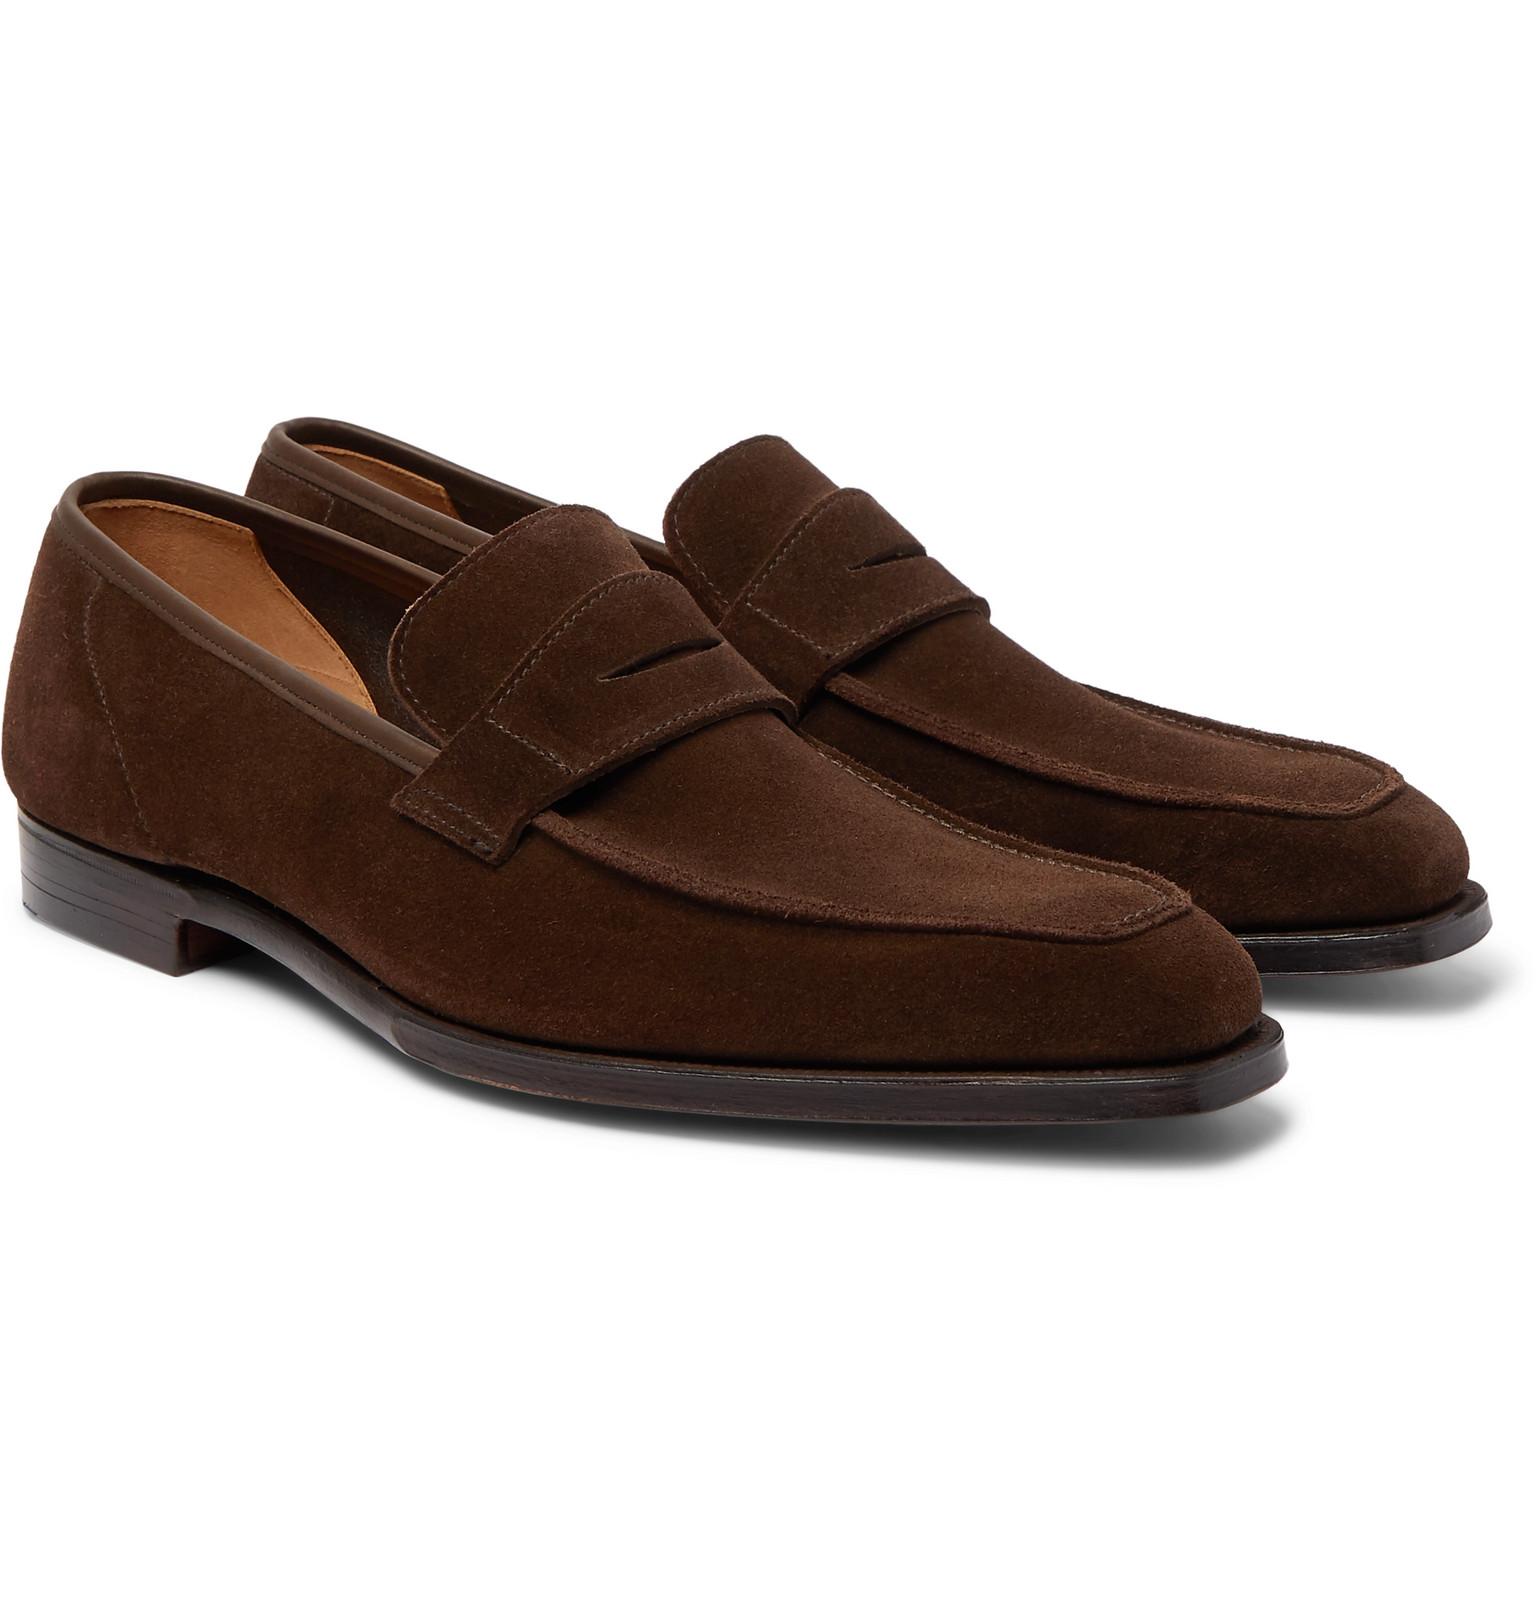 George Cleverley Leather Suede Penny Loafers in Brown for Men - Lyst